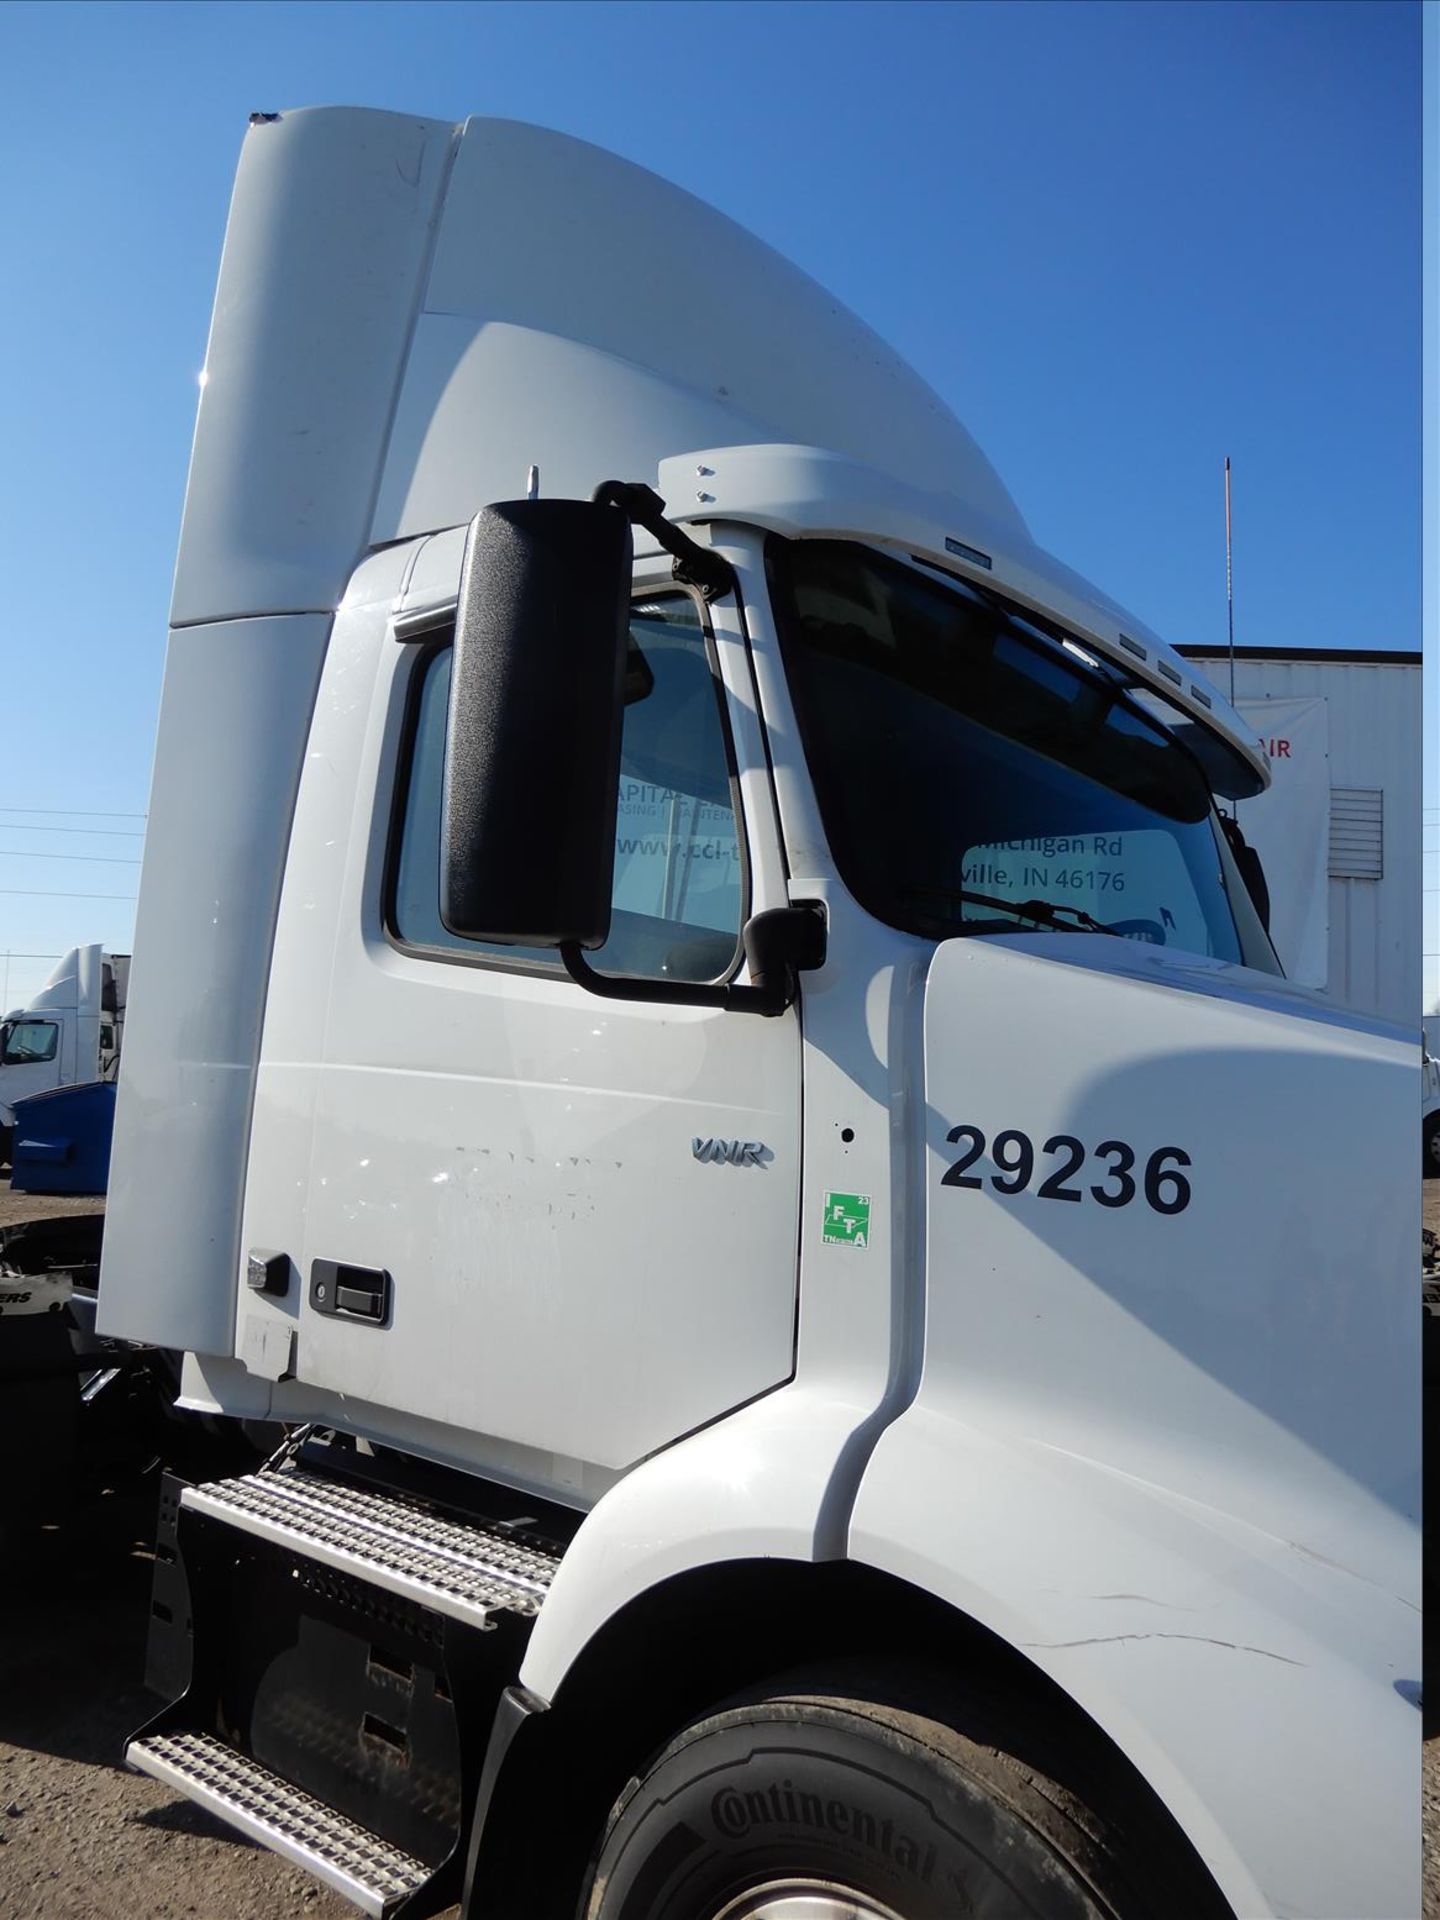 2019 Volvo VNR 300 Daycab Truck Tractor - Located in Indianapolis, IN - Image 27 of 61